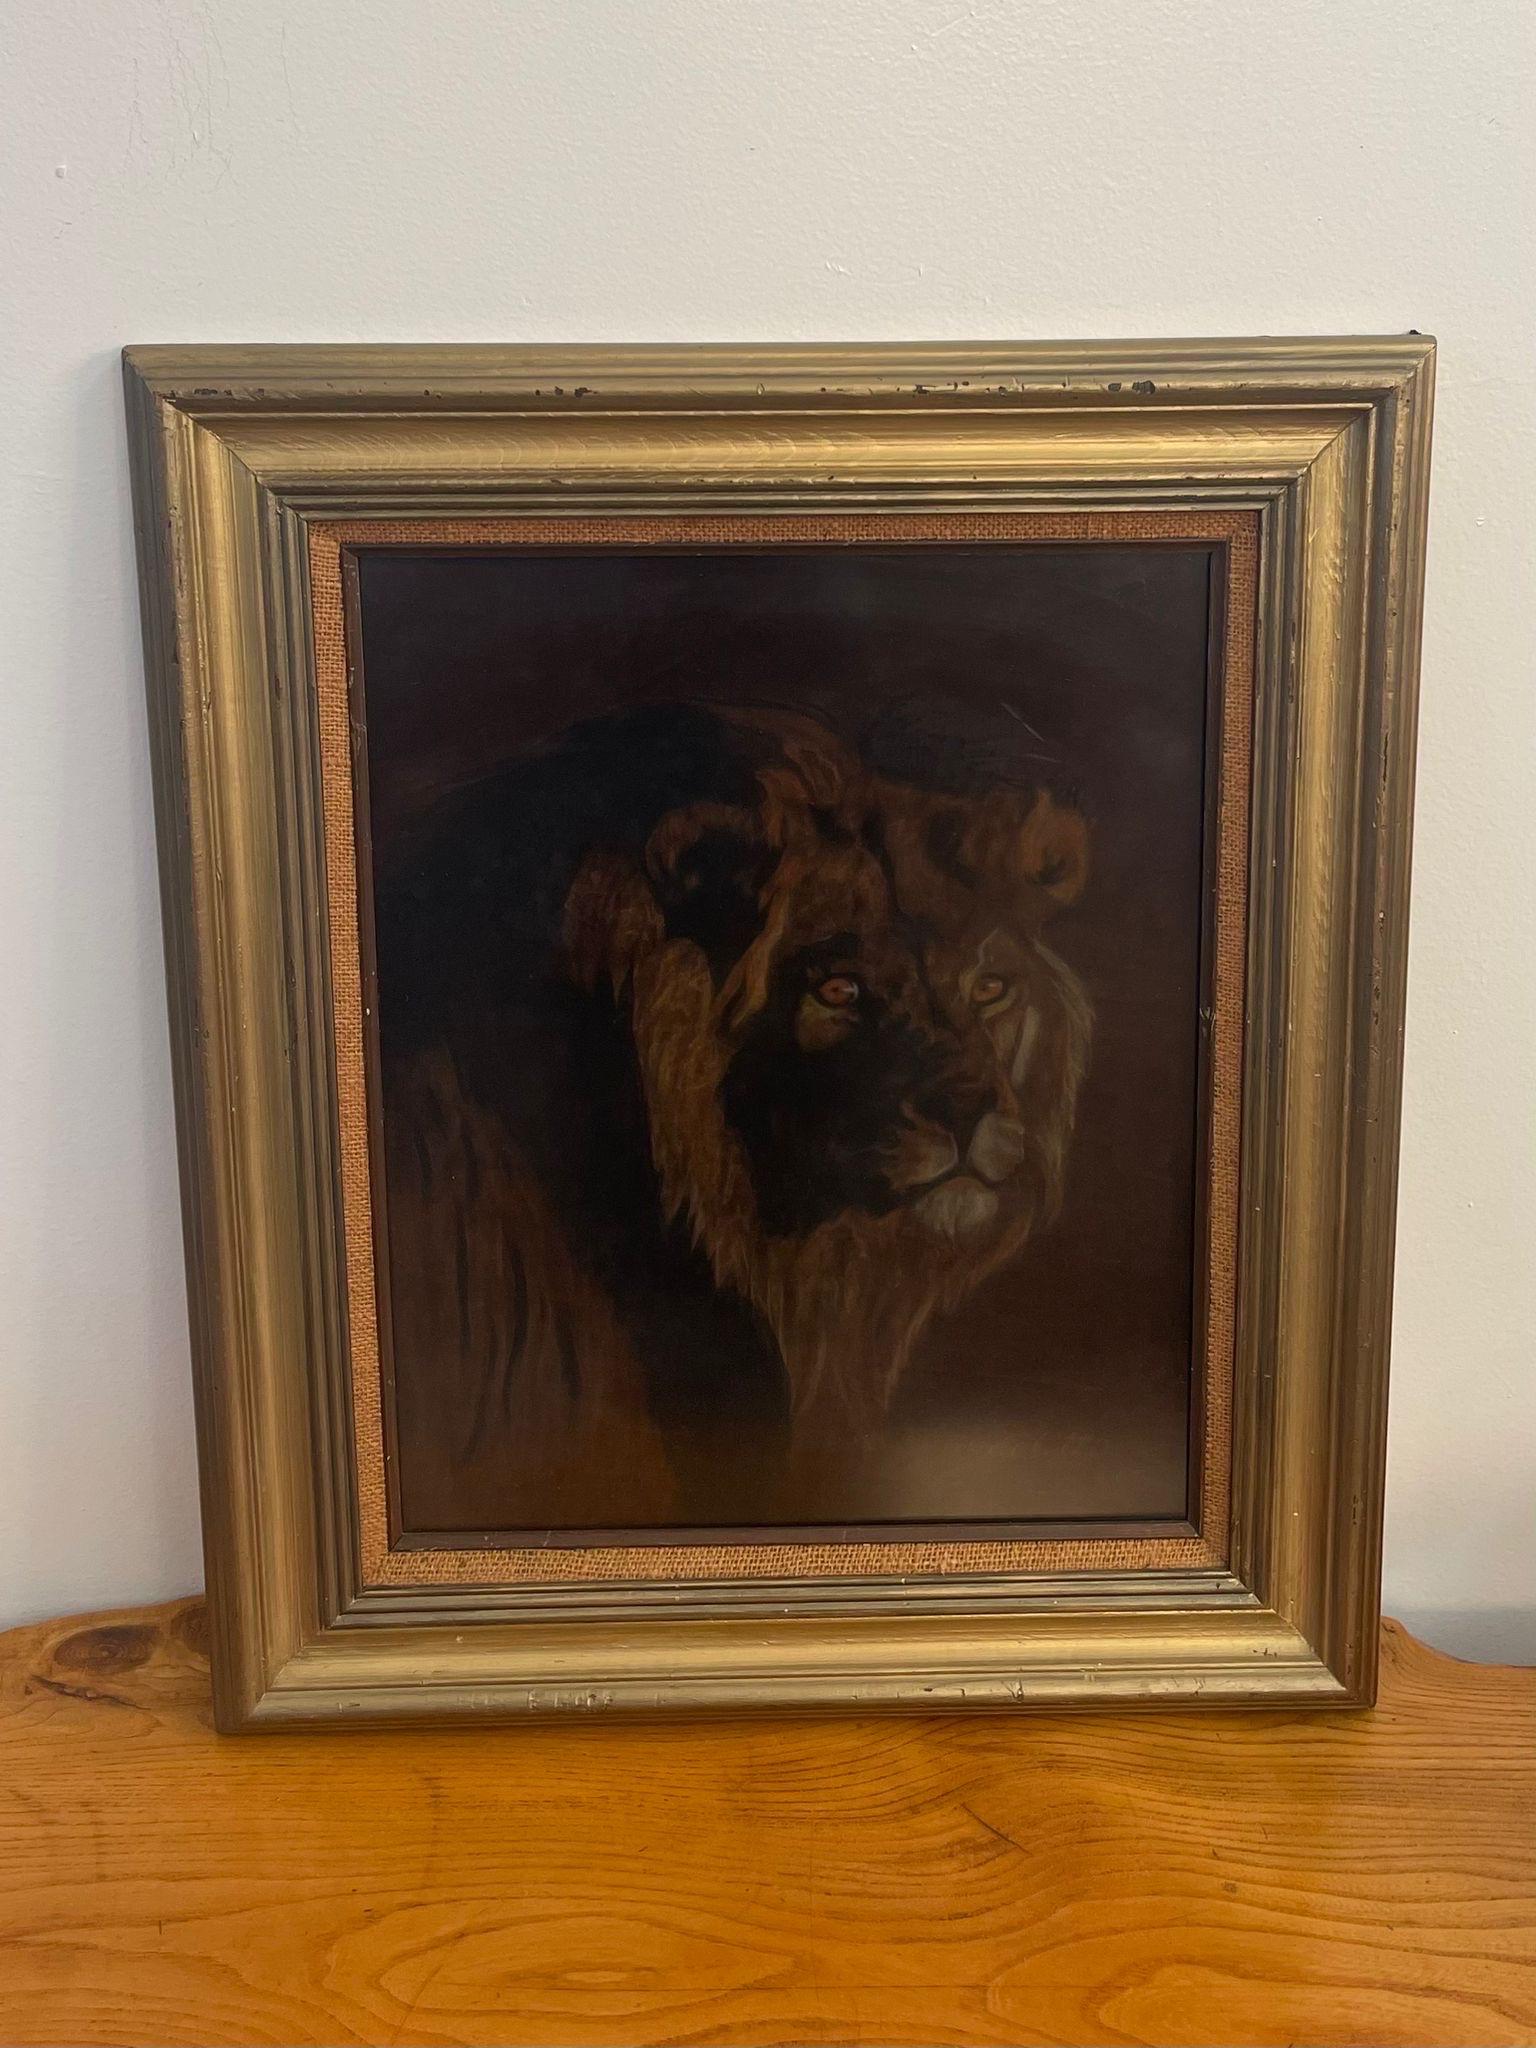 Possibly acrylic or pastel on brown velvet. This painting is subtle and striking, complemented well with the gold toned frame. Vintage Condition Consistent with Age as Pictured.

Dimensions. 23 W ; 1 D ; 27 H